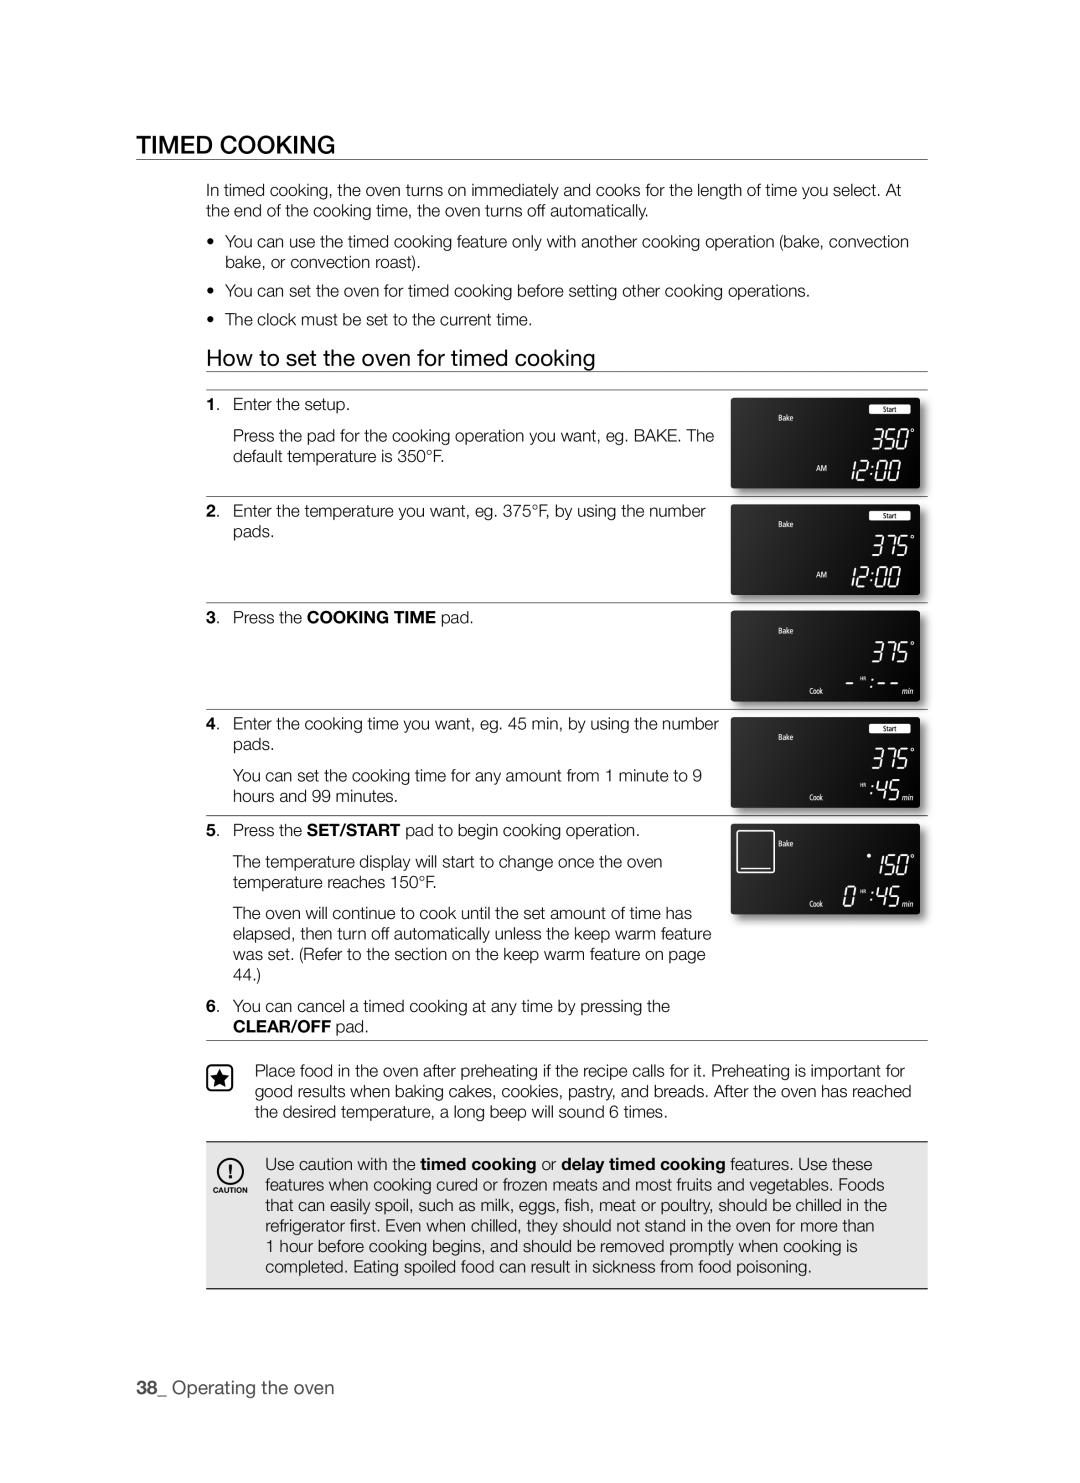 Samsung FTQ307NWGX user manual Timed cooking, How to set the oven for timed cooking, Operating the oven 